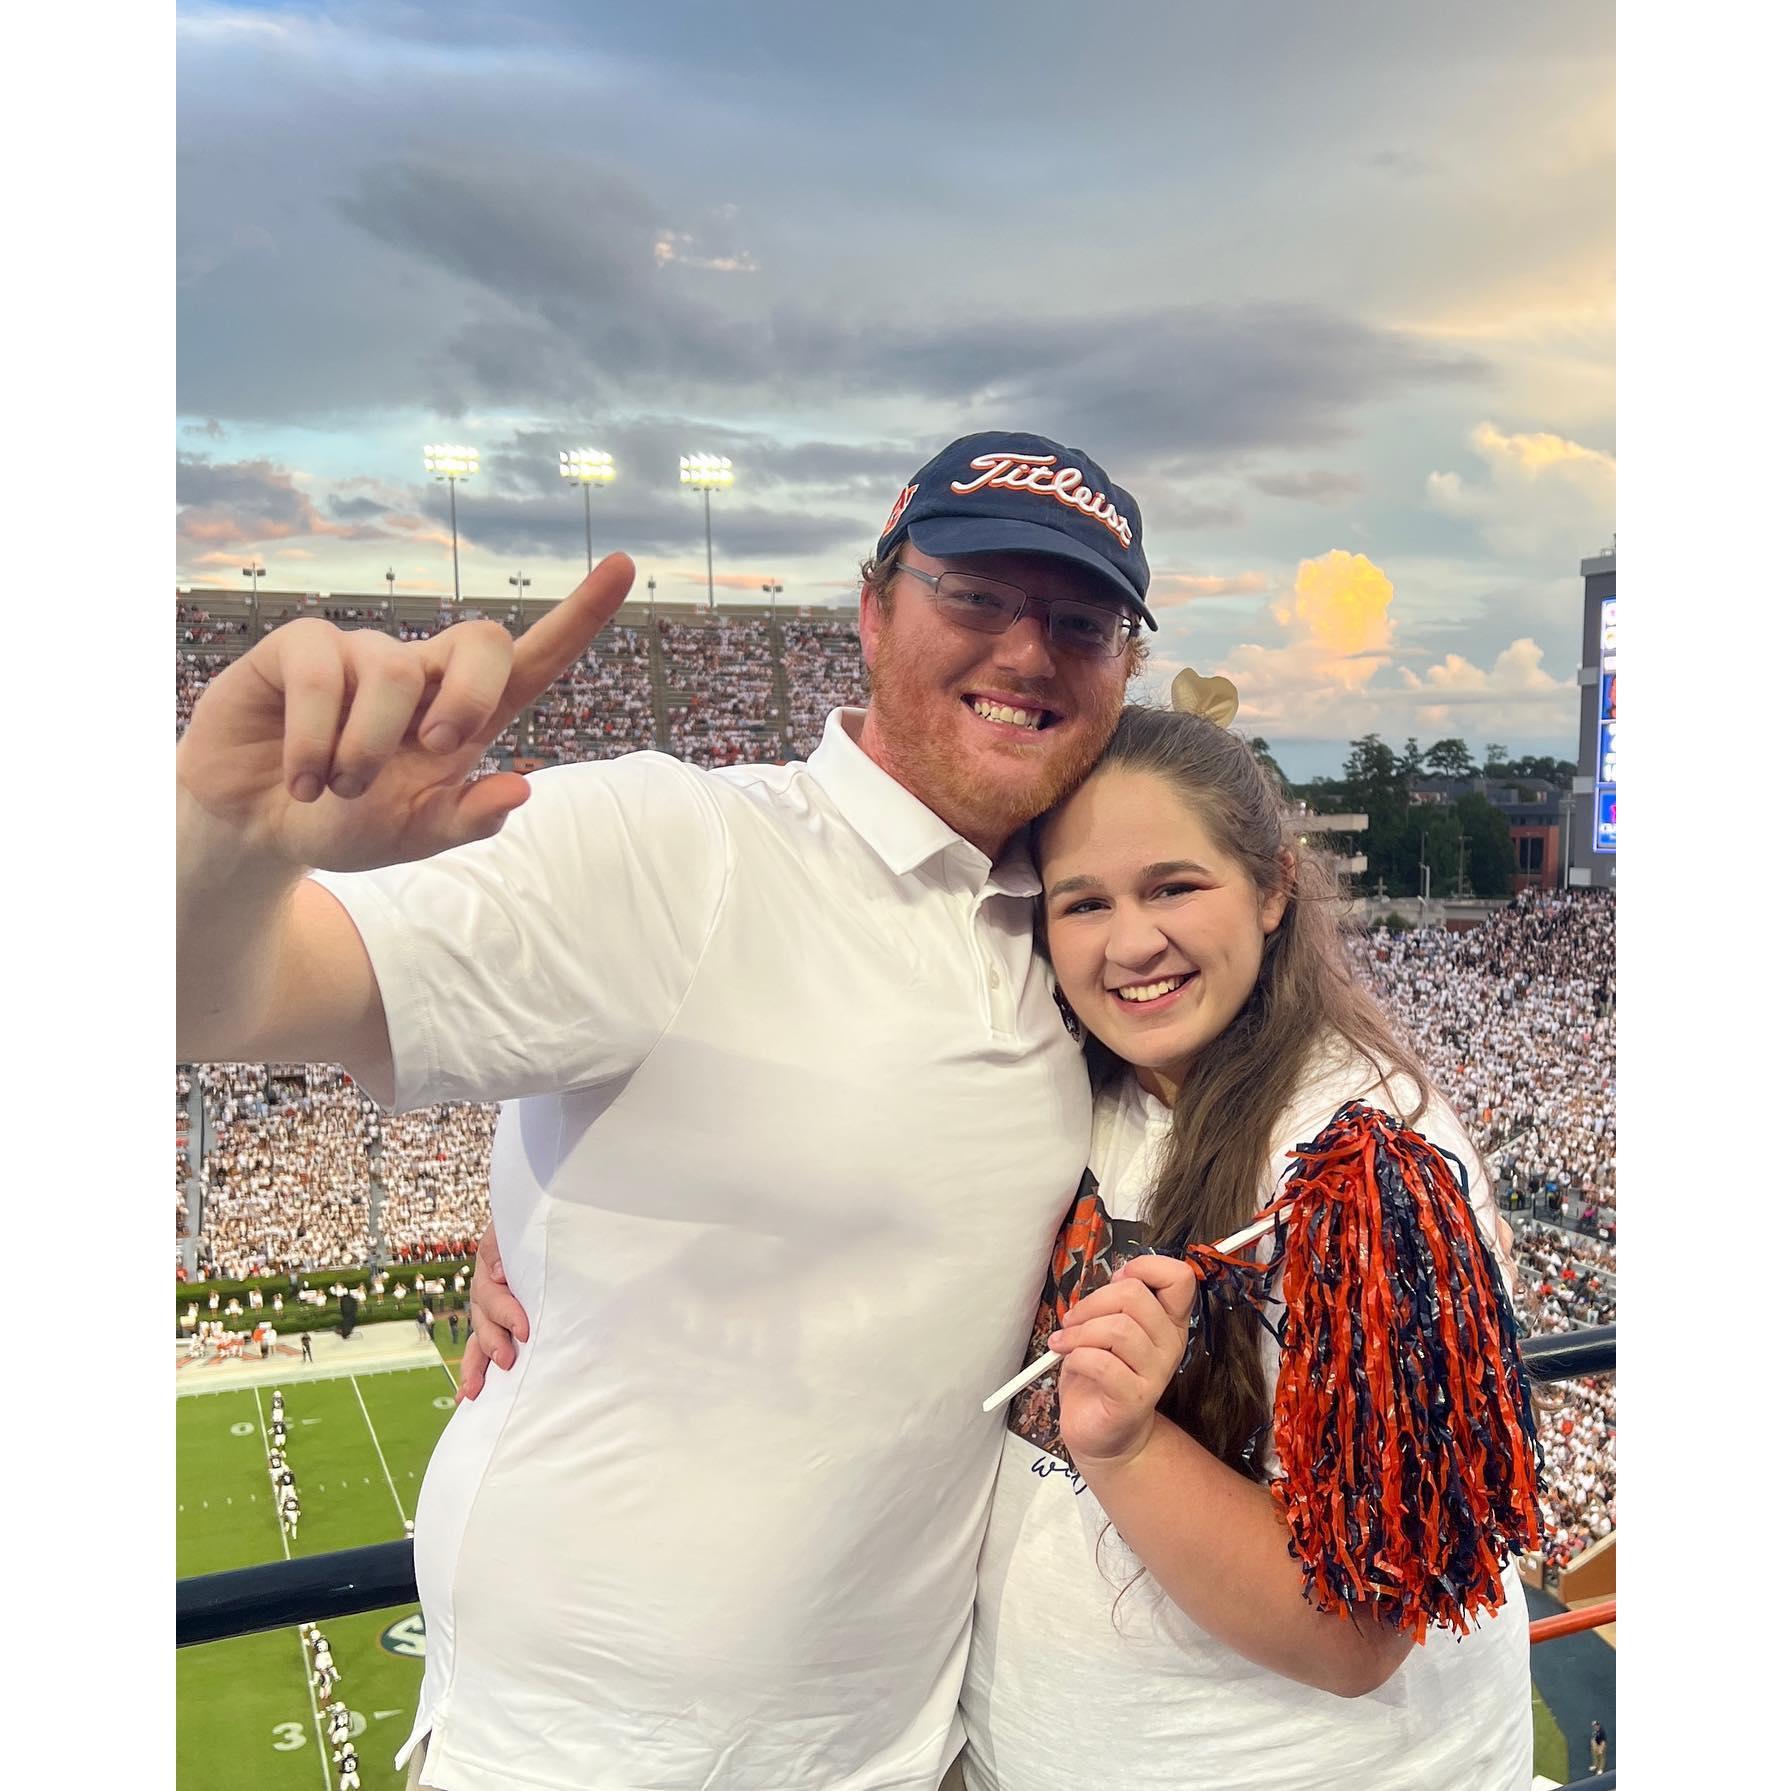 Our first Auburn football game together!